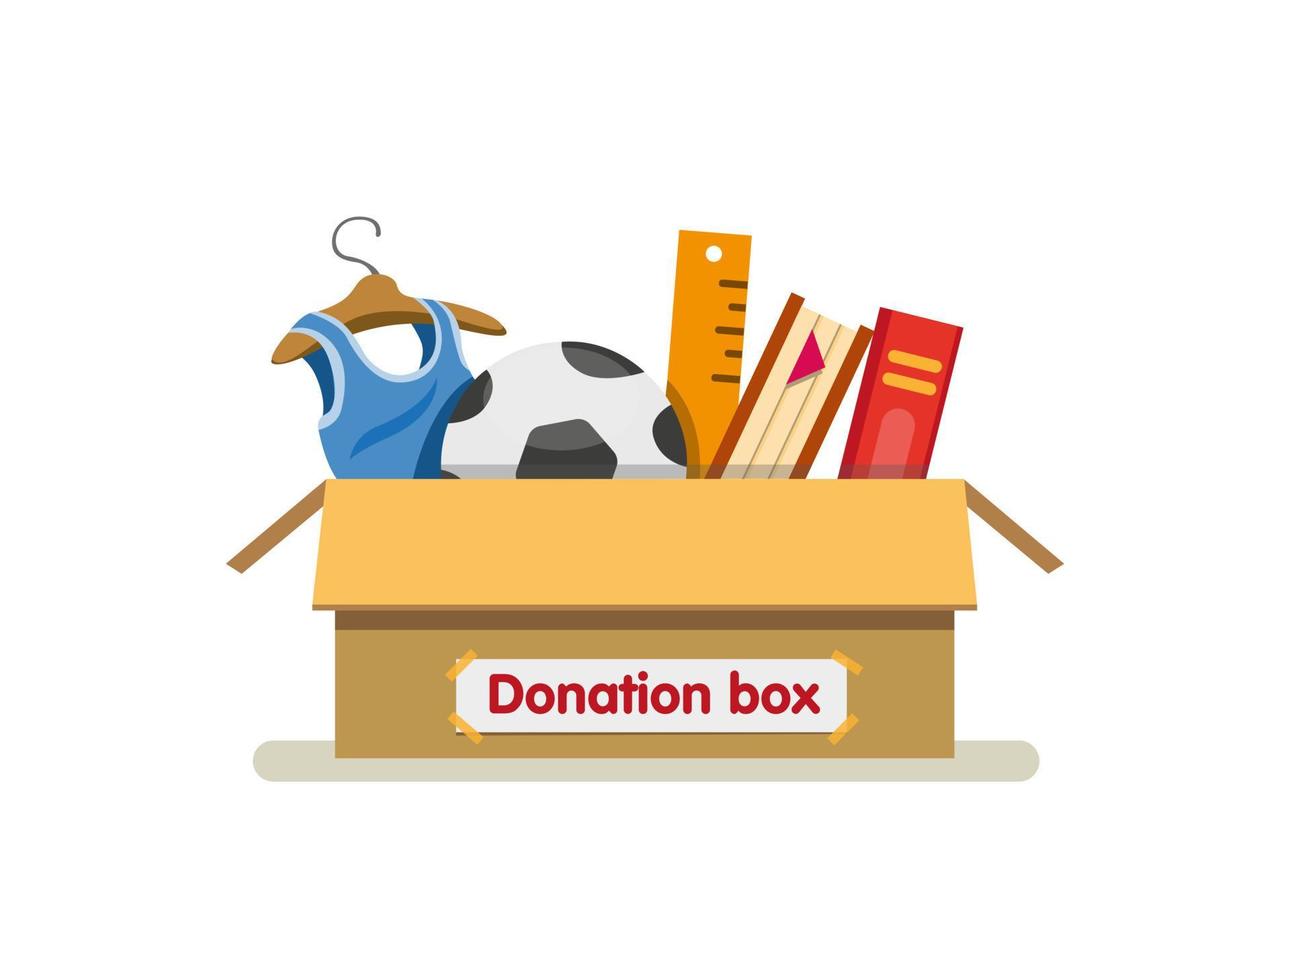 books, toys, and clothing in donation box cardboard ready send for charity in cartoon flat illustration vector isolated in white background